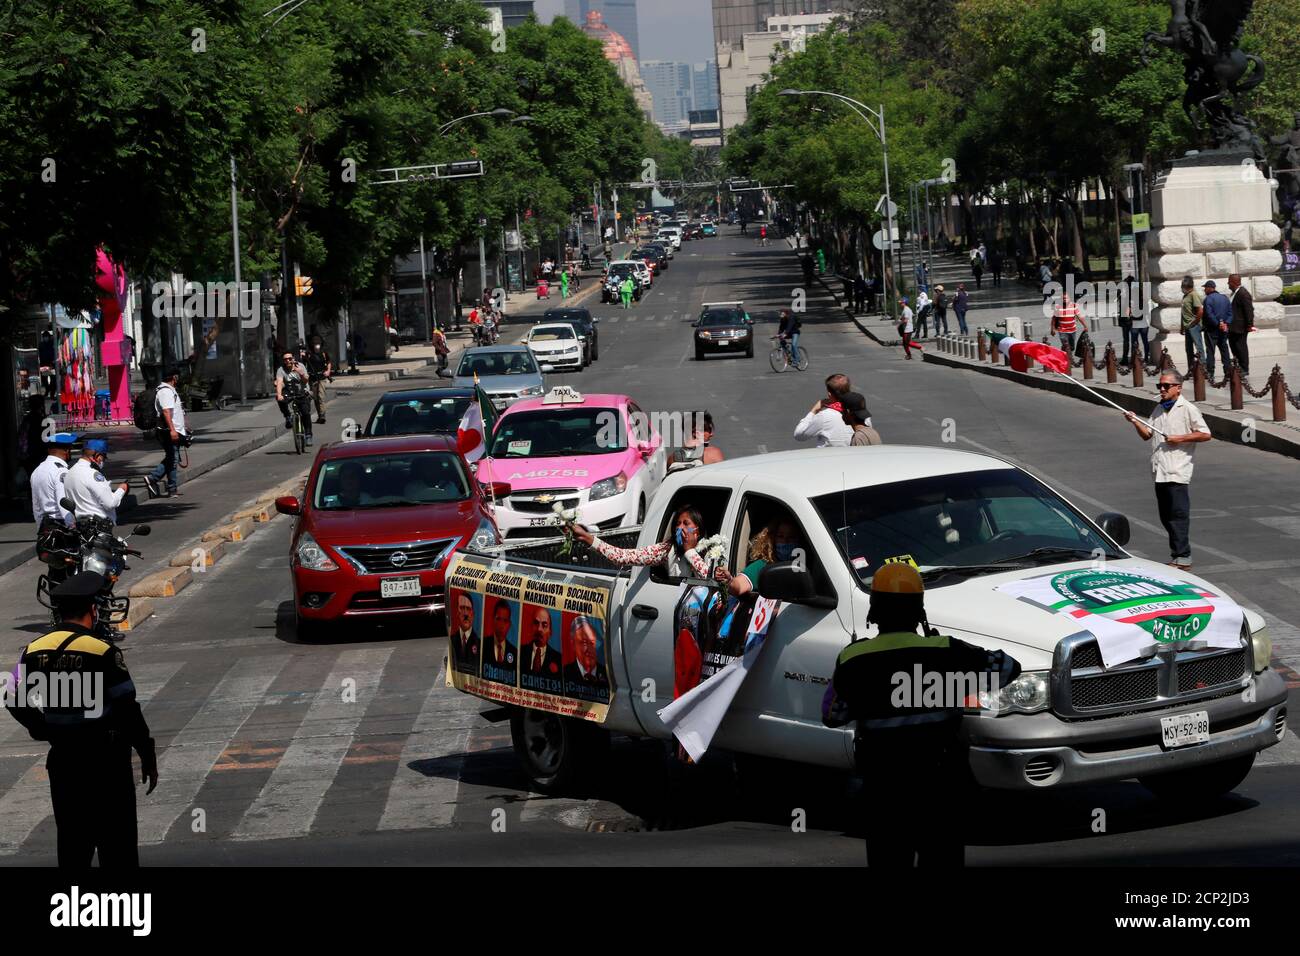 Vehicles take part in a caravan to protest against the Mexican President Andres Manuel Lopez Obrador (ALMO) in Mexico City, Mexico June 14, 2020. REUTERS/Carlos Jasso Stock Photo